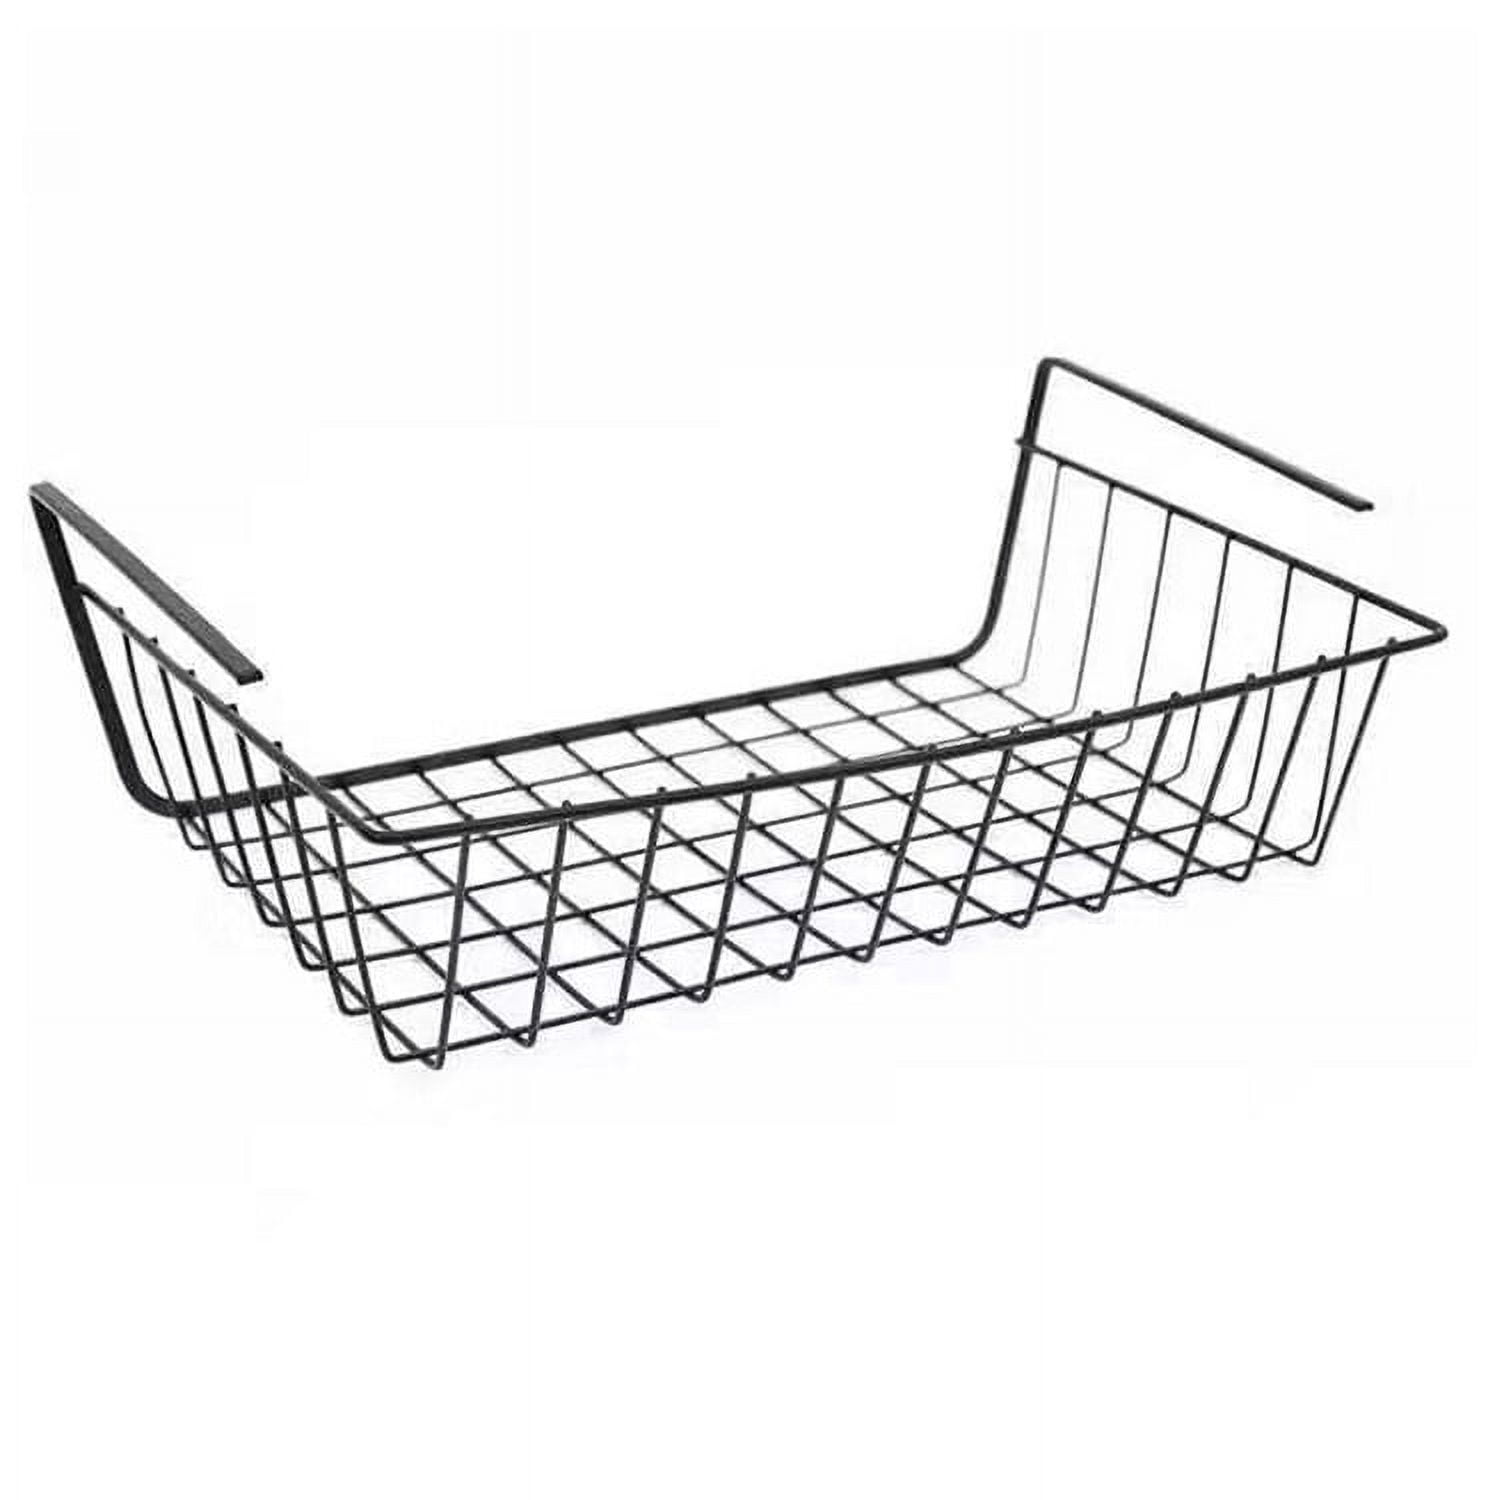 Comfecto Under Shelf Basket, 2 Pack Stainless Steel Wire Rack for Cabinet  Thickness Max 1.2 inch, Space Saving Undershelf Cabinet Storage for